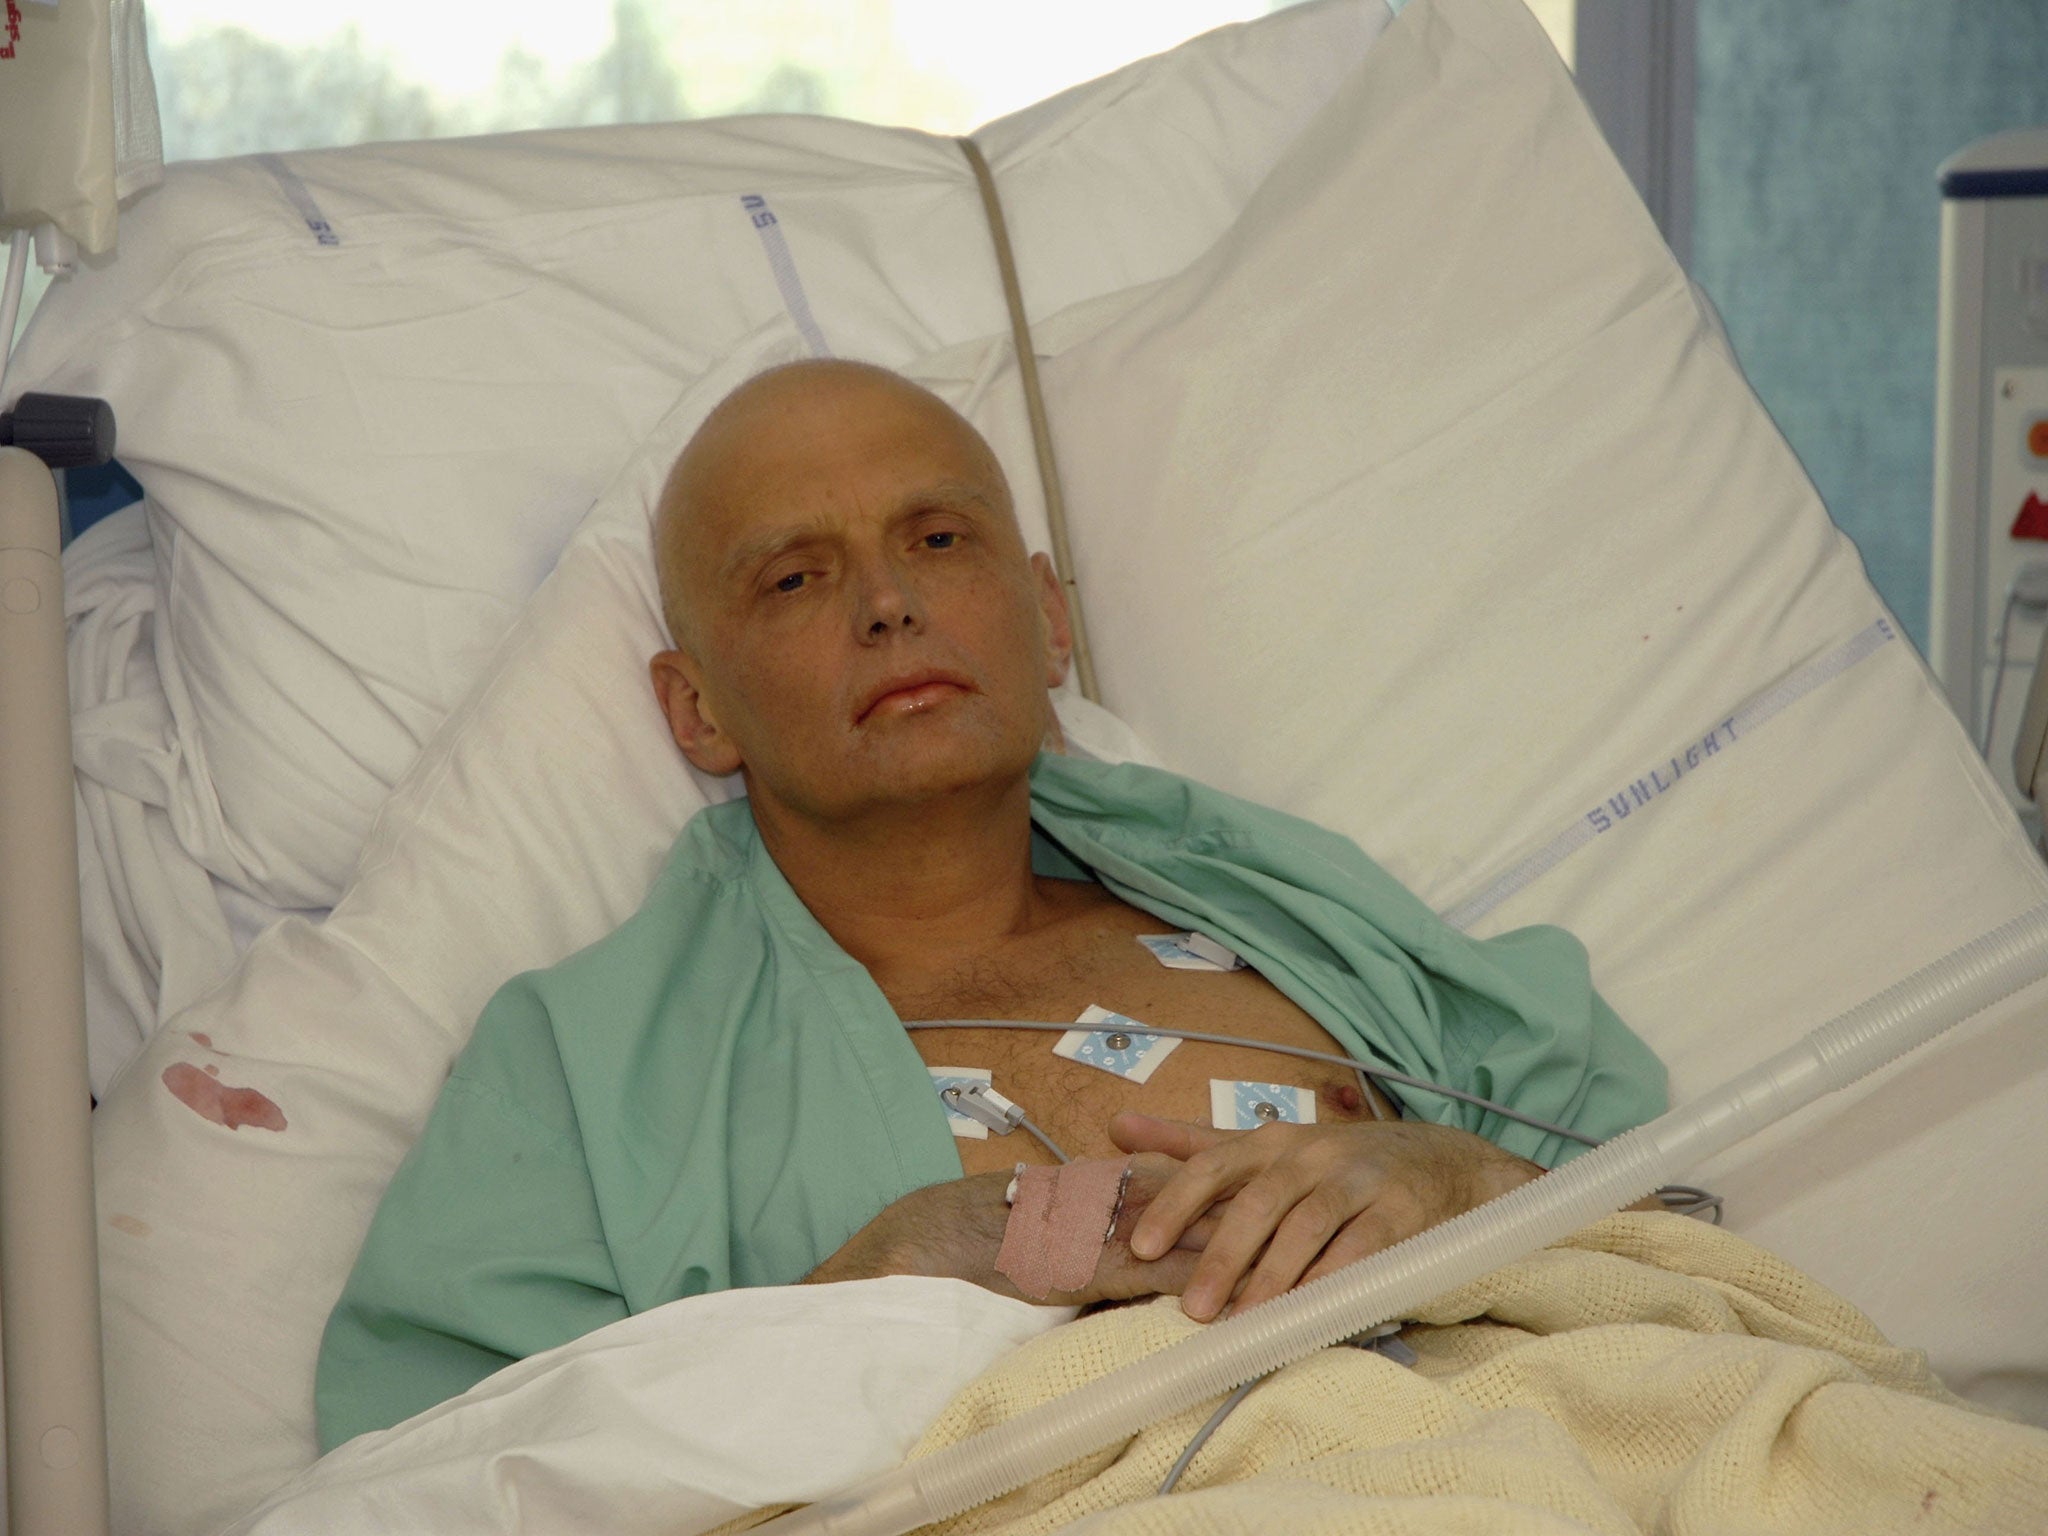 Alexander Litvinenko is pictured at the Intensive Care Unit of University College Hospital on 20 November 2006 in London